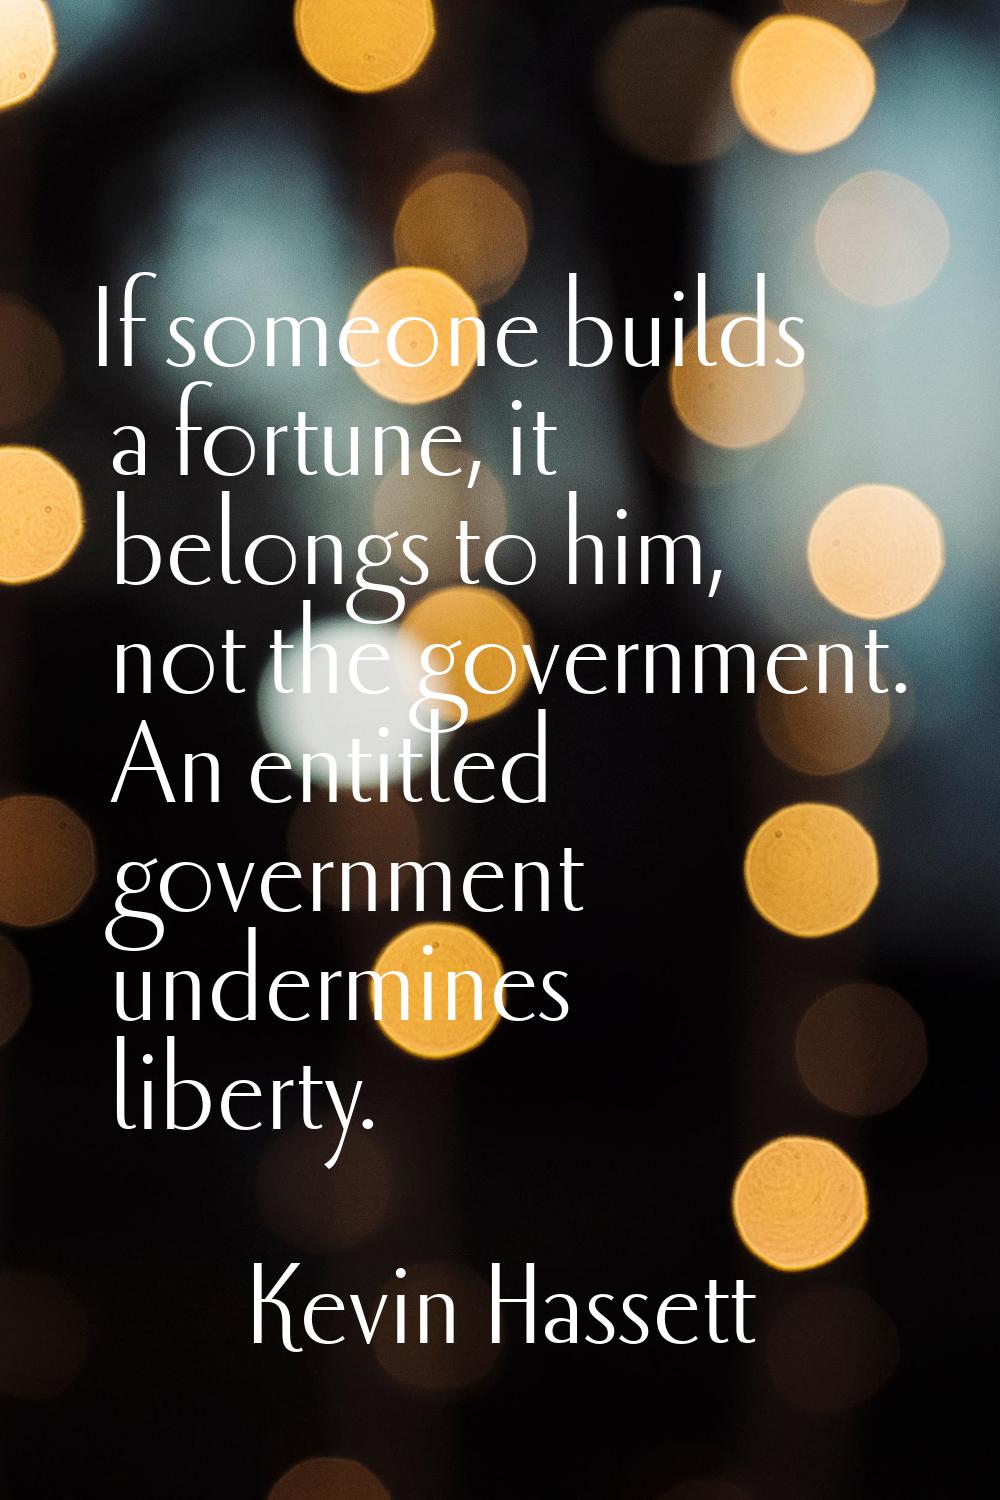 If someone builds a fortune, it belongs to him, not the government. An entitled government undermin